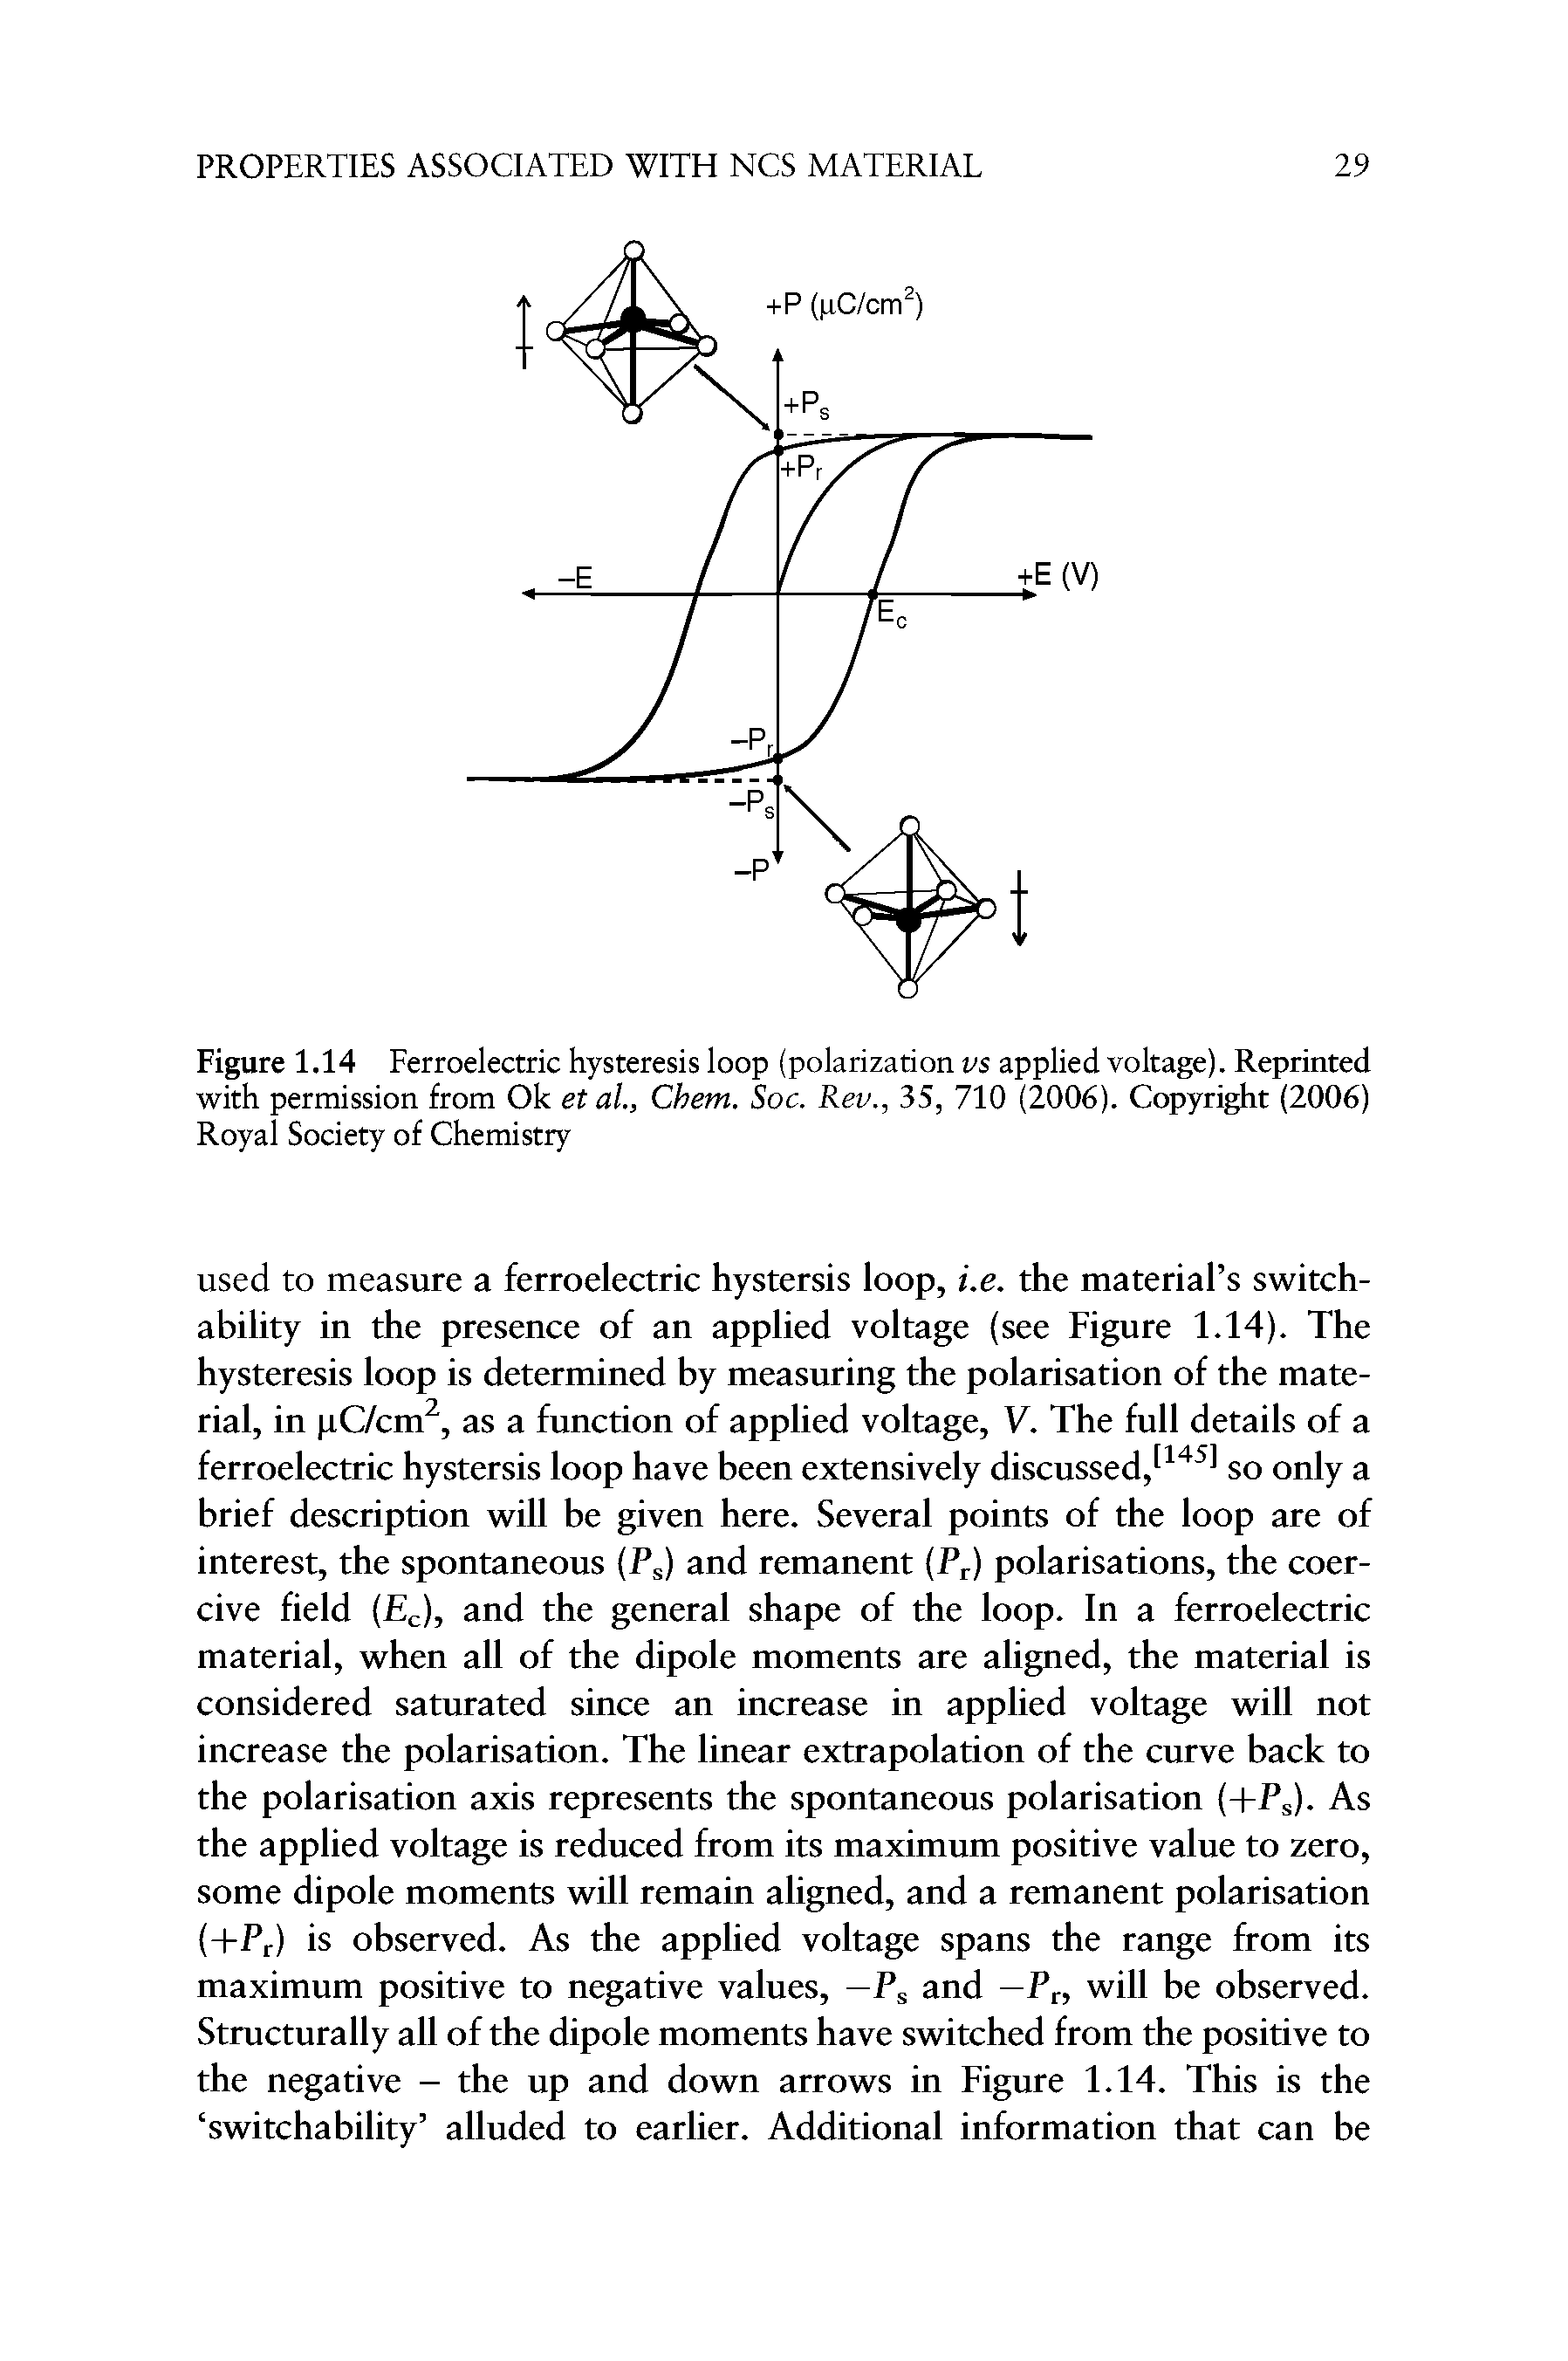 Figure 1.14 Ferroelectric hysteresis loop (polarization vs applied voltage). Reprinted with permission from Ok et ah, Chem. Soc. Rev., 35, 710 (2006). Copyright (2006) Royal Society of Chemistry...